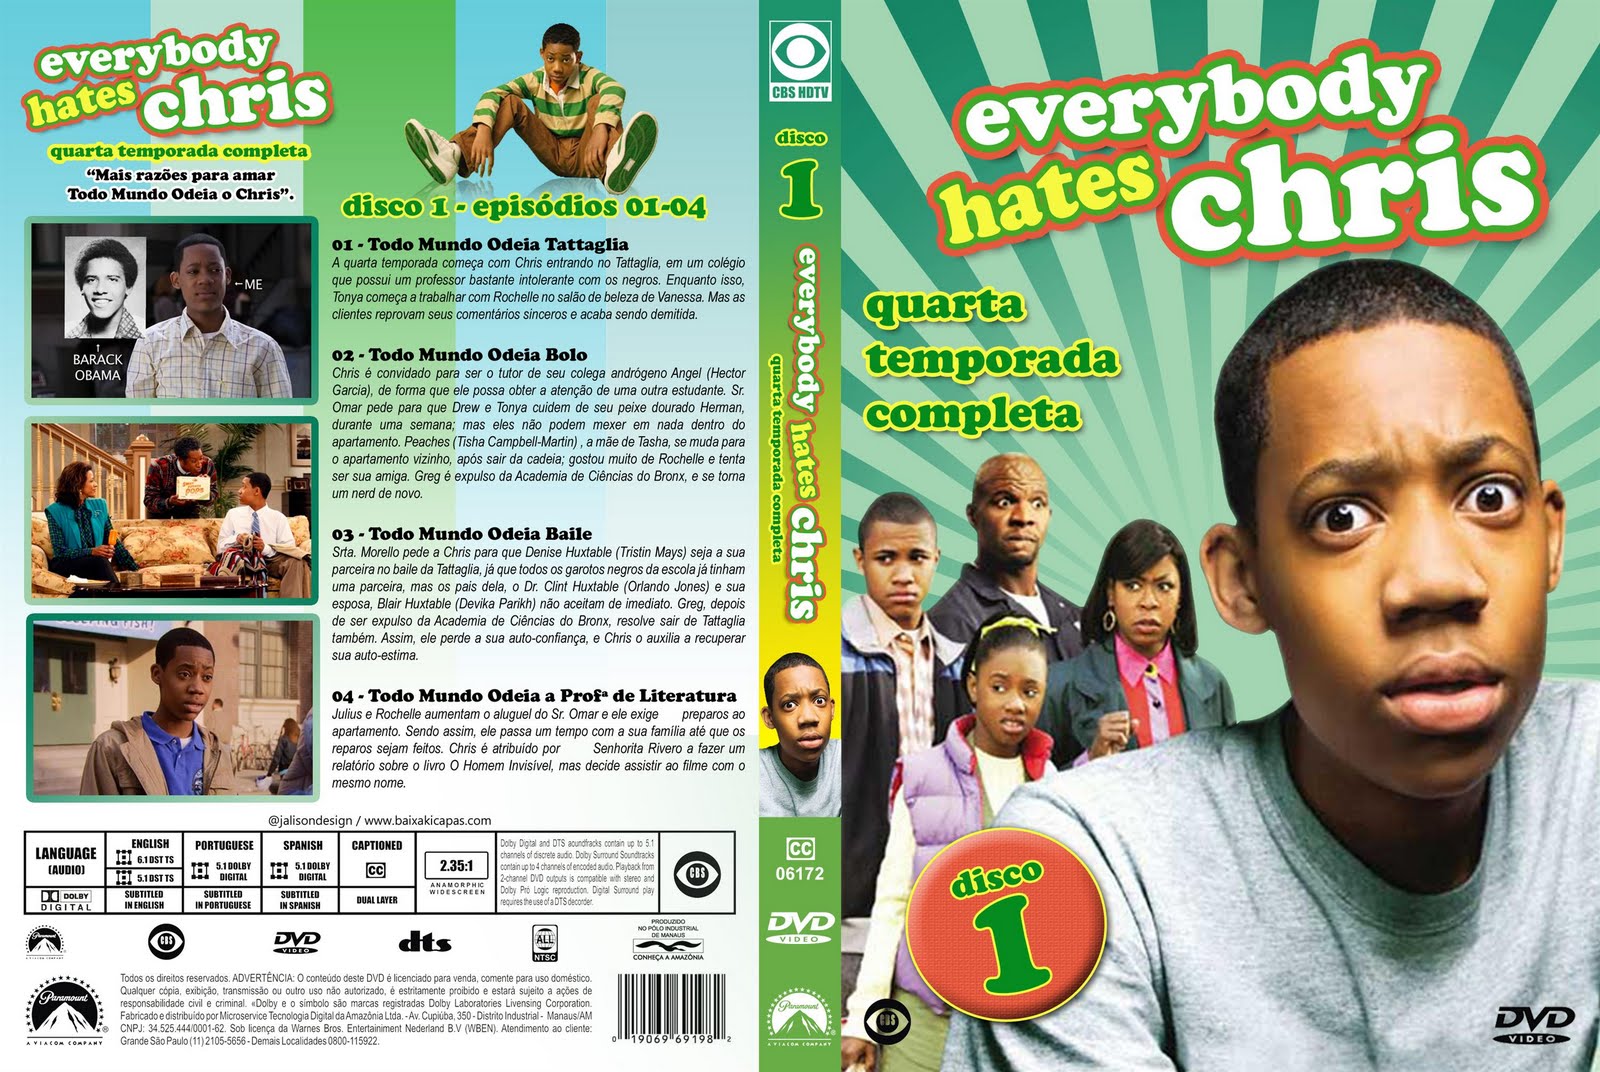 Everybody Hates Chris The Complete Collection DVD Unboxing